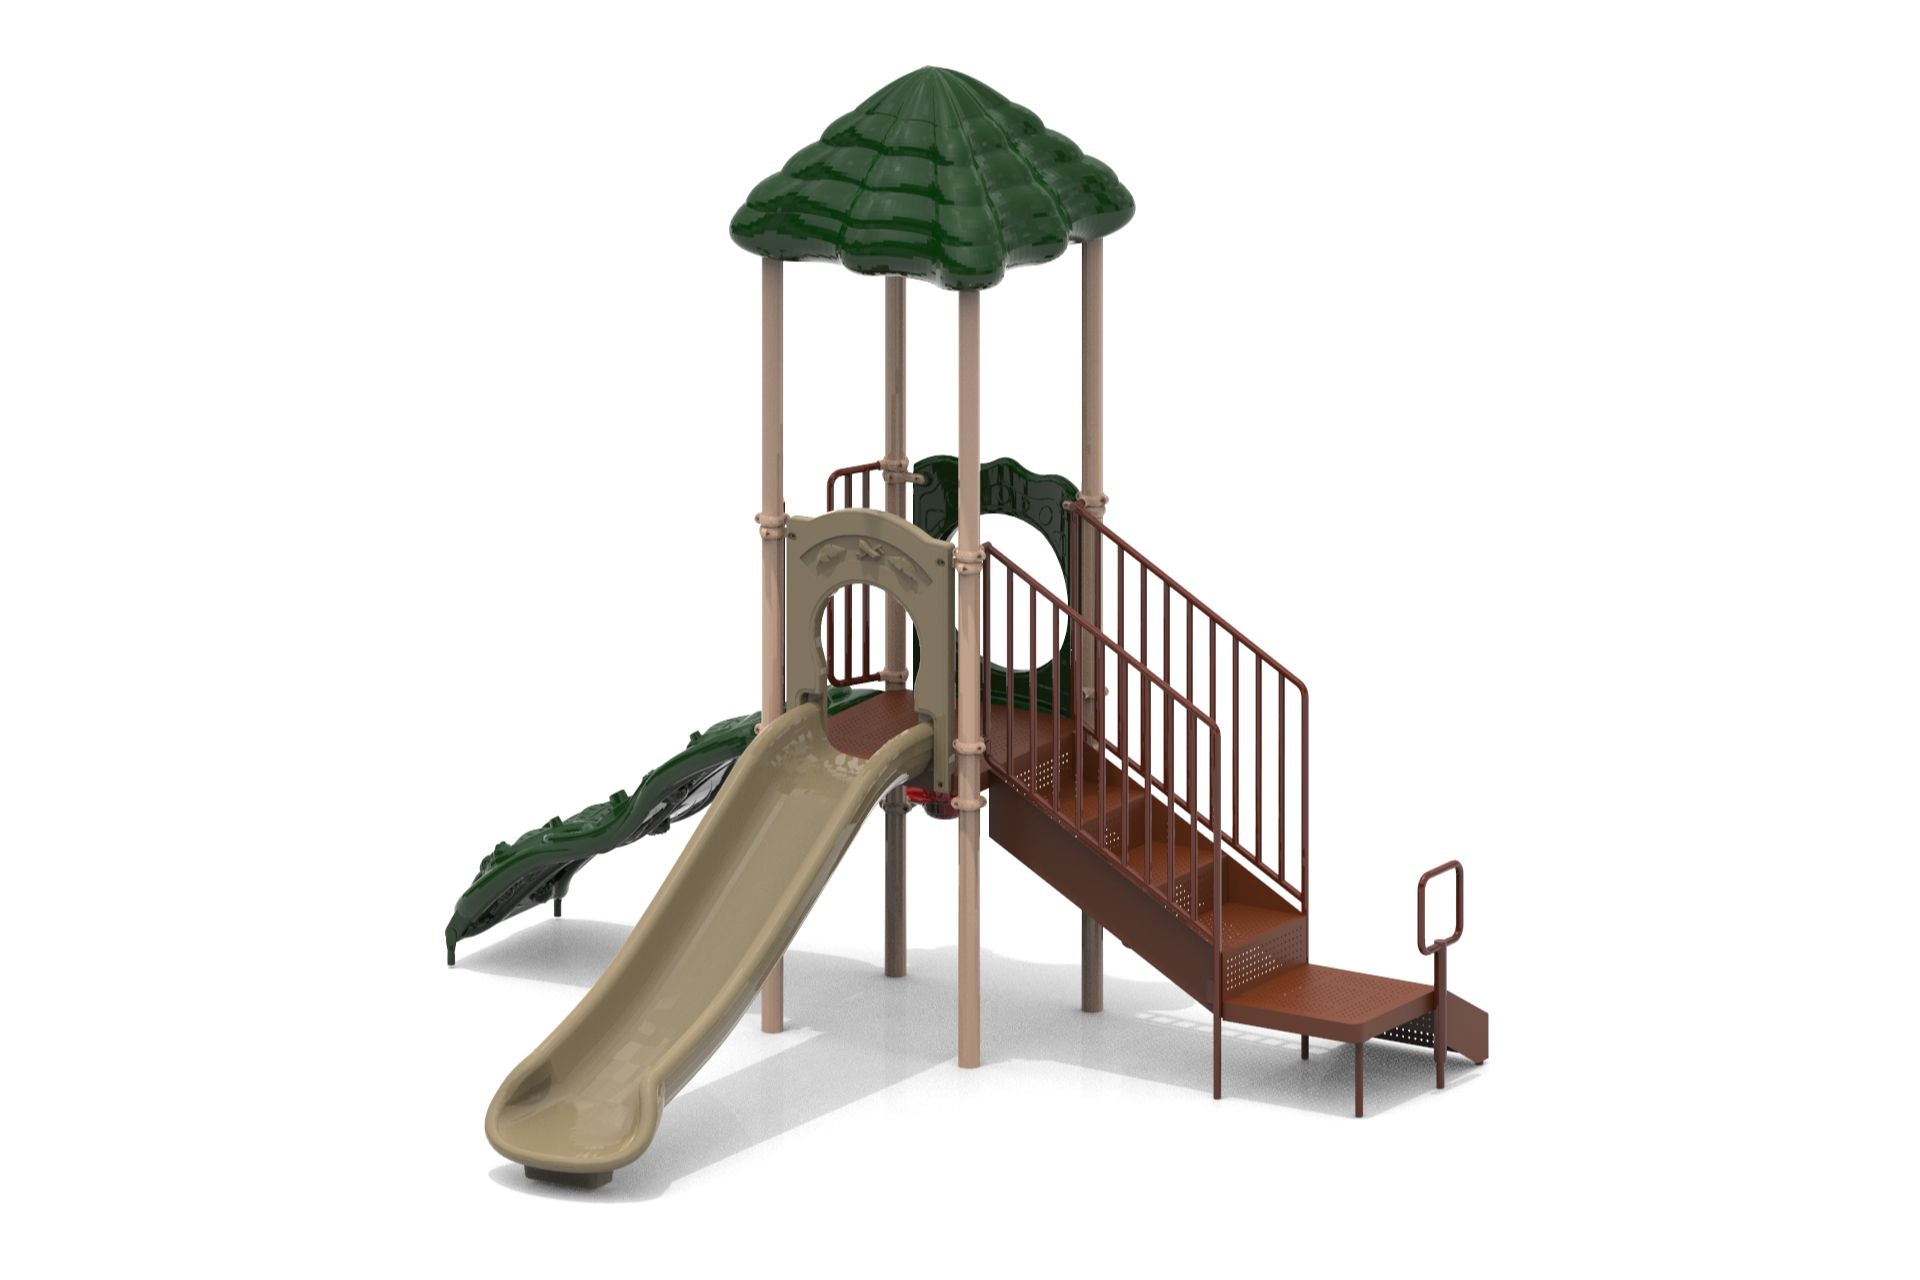 South Fork Play System